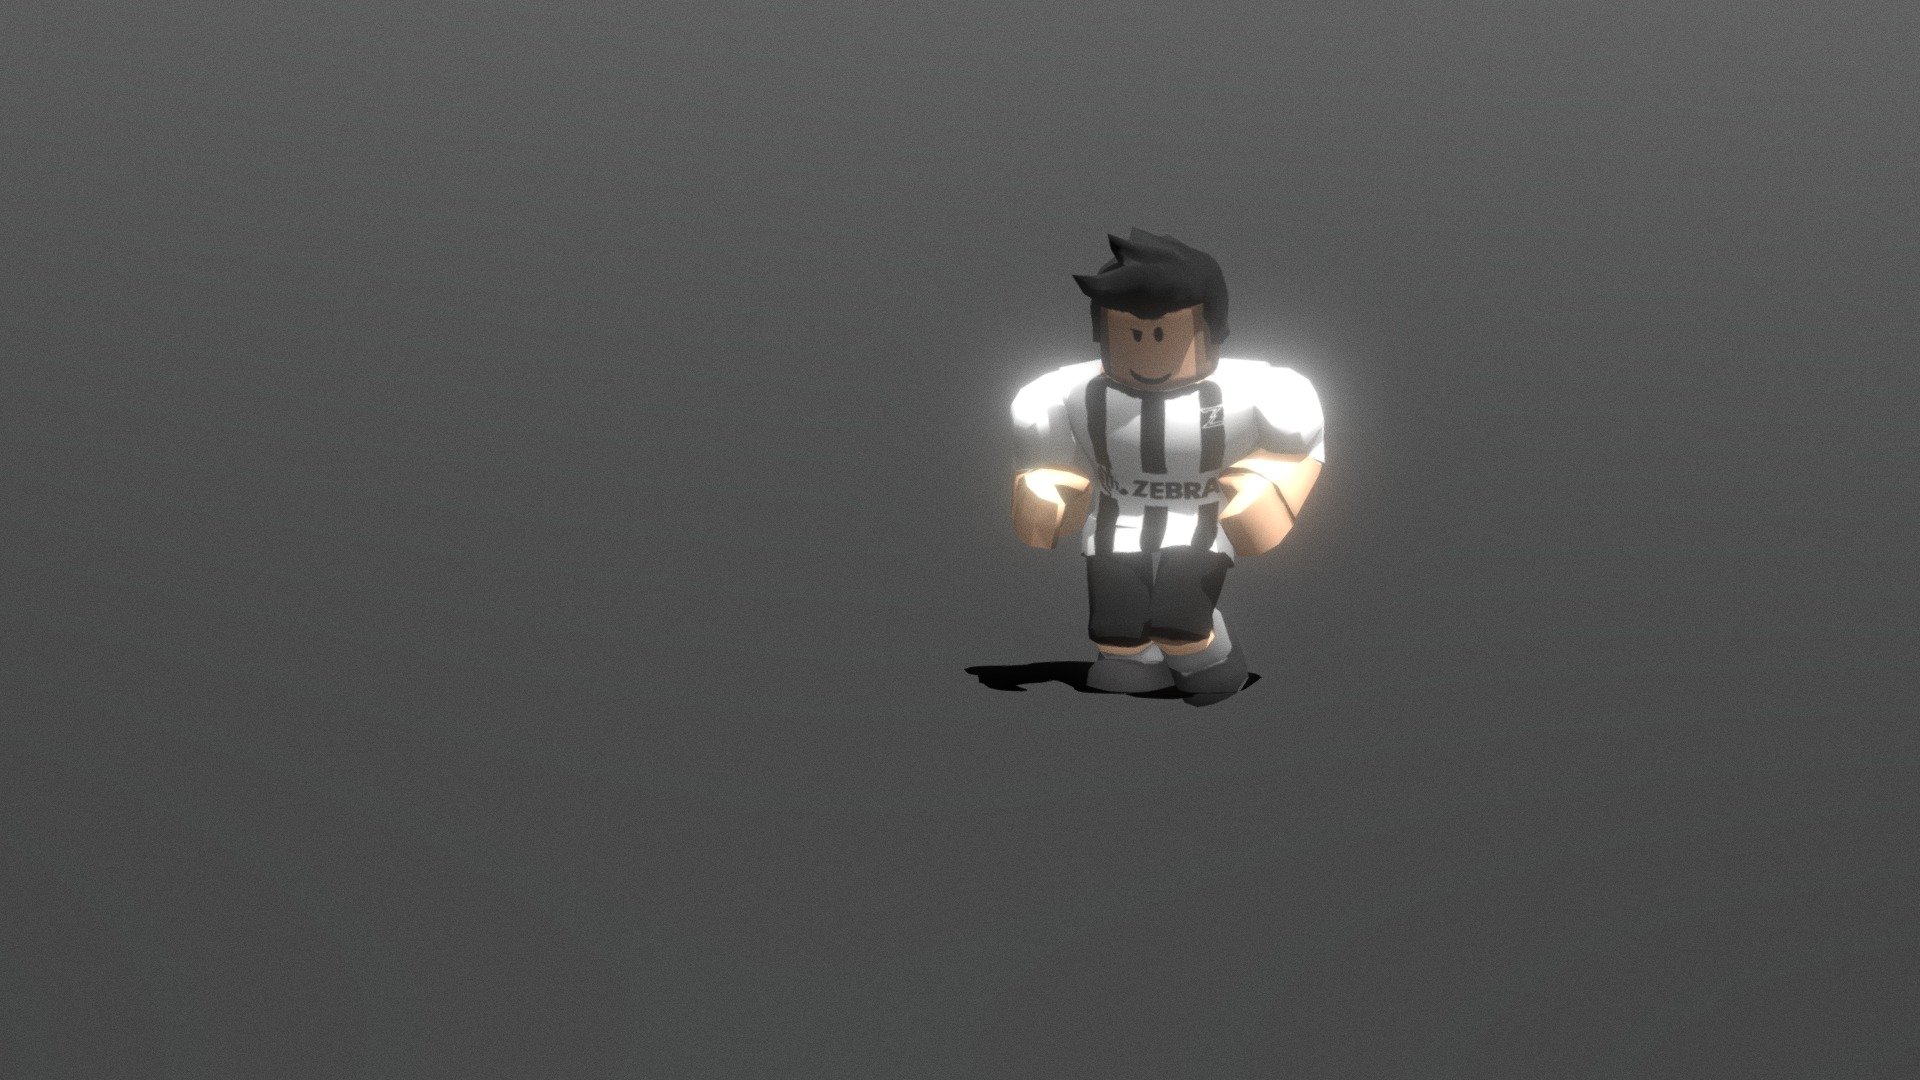 Roblox Soccer Player Animation 3d Model By Ars 3d M Arsyi Fathirahman B4ae453 - roblox soccer player